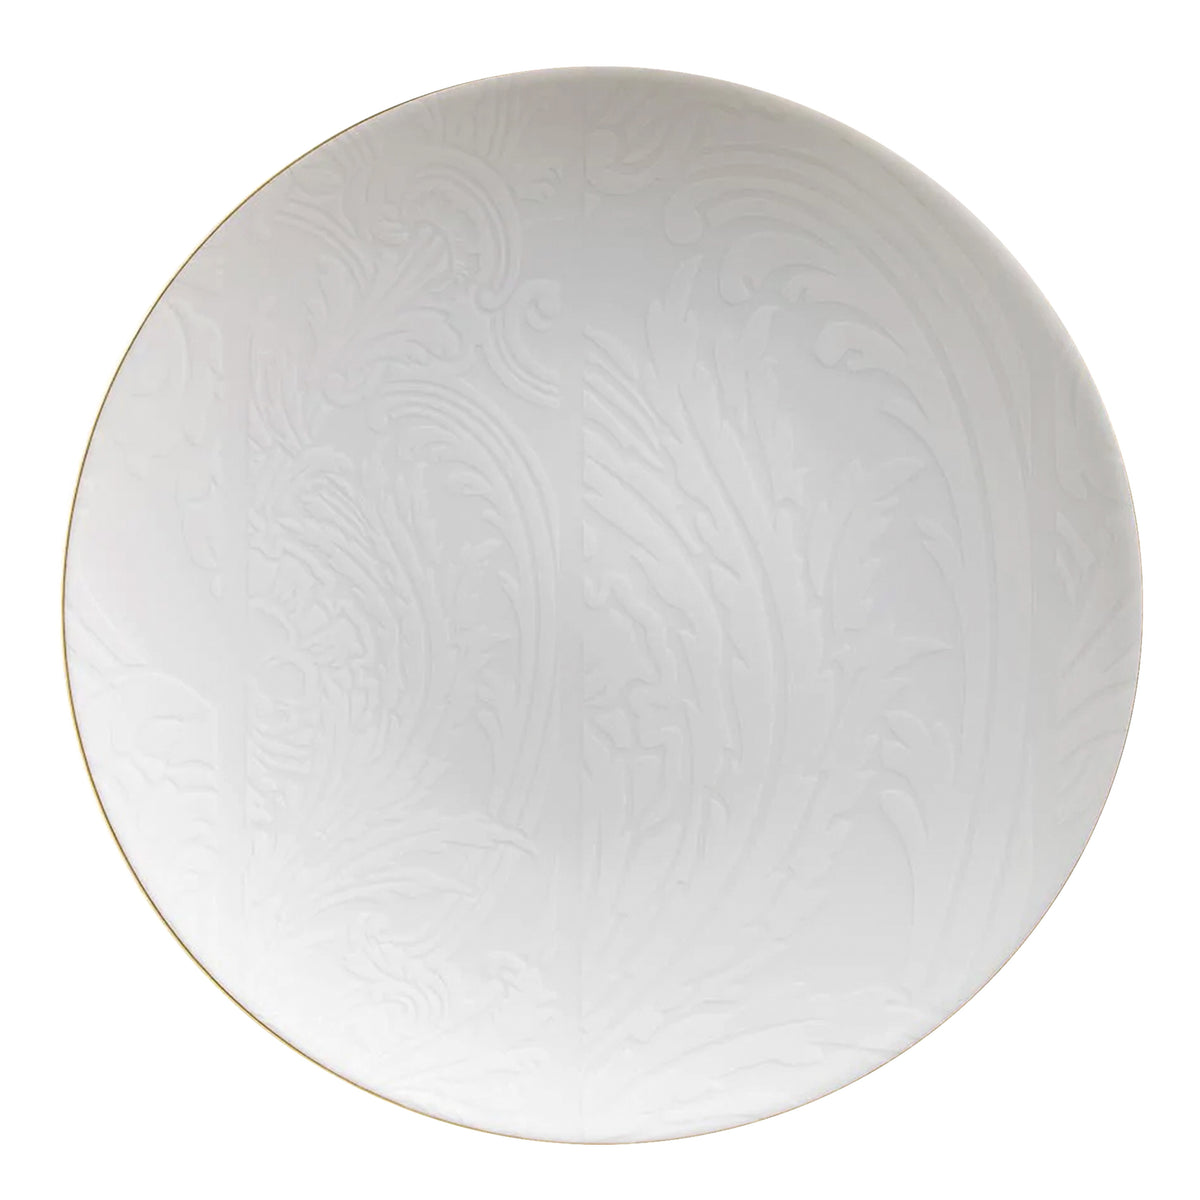 INDIANS White on White Gold Net - Charger plate